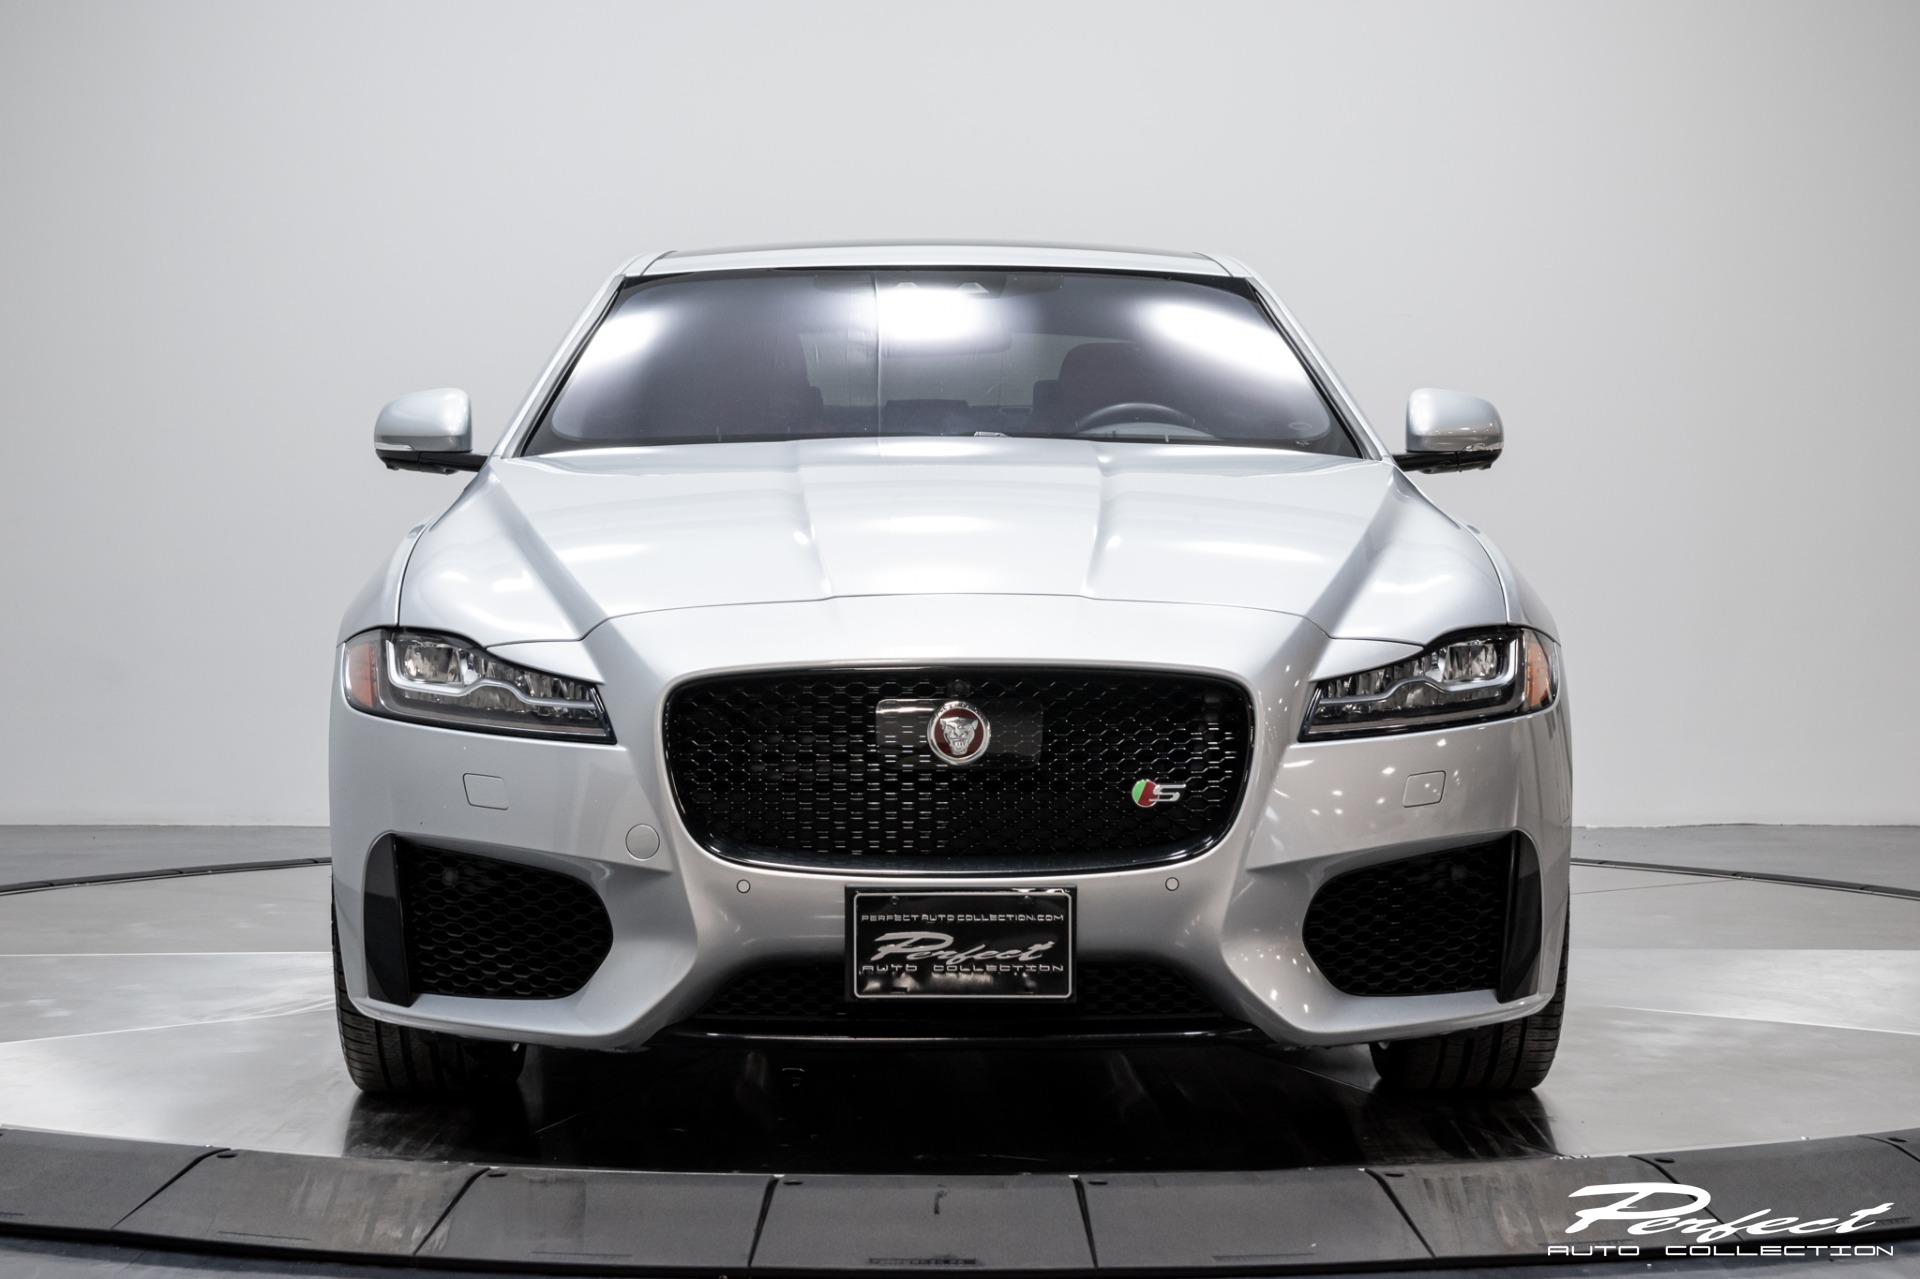 Used 2017 Jaguar XF S For Sale ($31,993) | Perfect Auto Collection Stock #Y49322